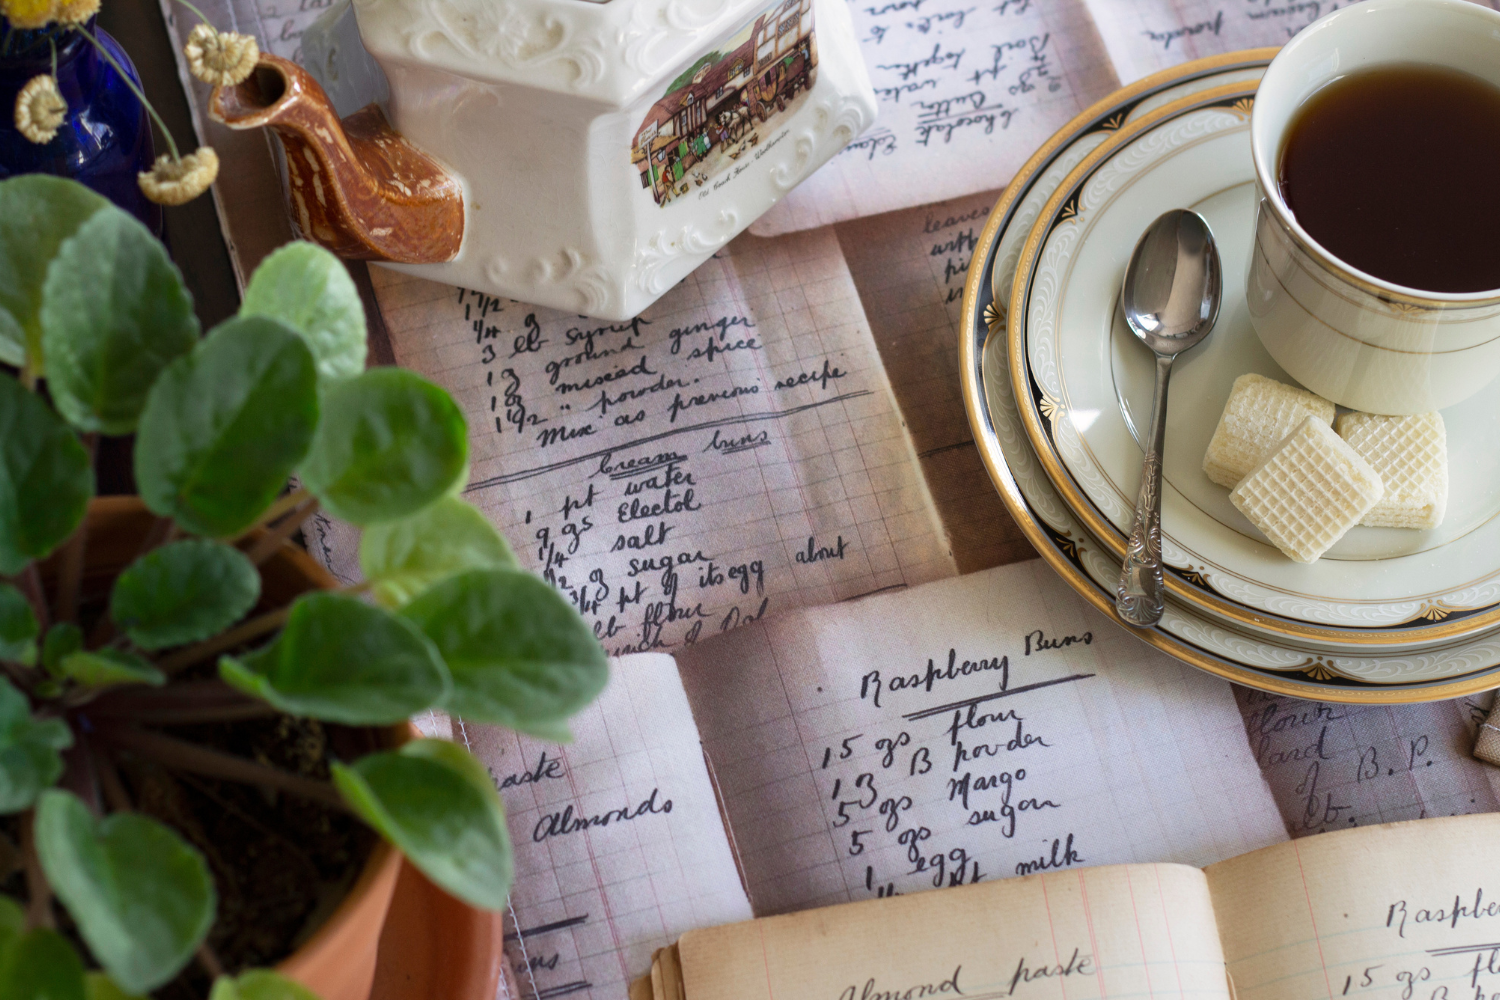 A table runner with a design of overlapping handwritten recipes in black cursive font lays down the center of a table. An off-white saucer with a tan rim and small navy accents sits to the right of the photo with a silver spoon to the left, three small square wafer cookies to the bottom and a cup of black tea in the center. A brown planter with green leaves on brown stems is to the left of the saucer. A cream-colored teapot with a brown spout sits at the top of the photo with a drawing of an old hotel.